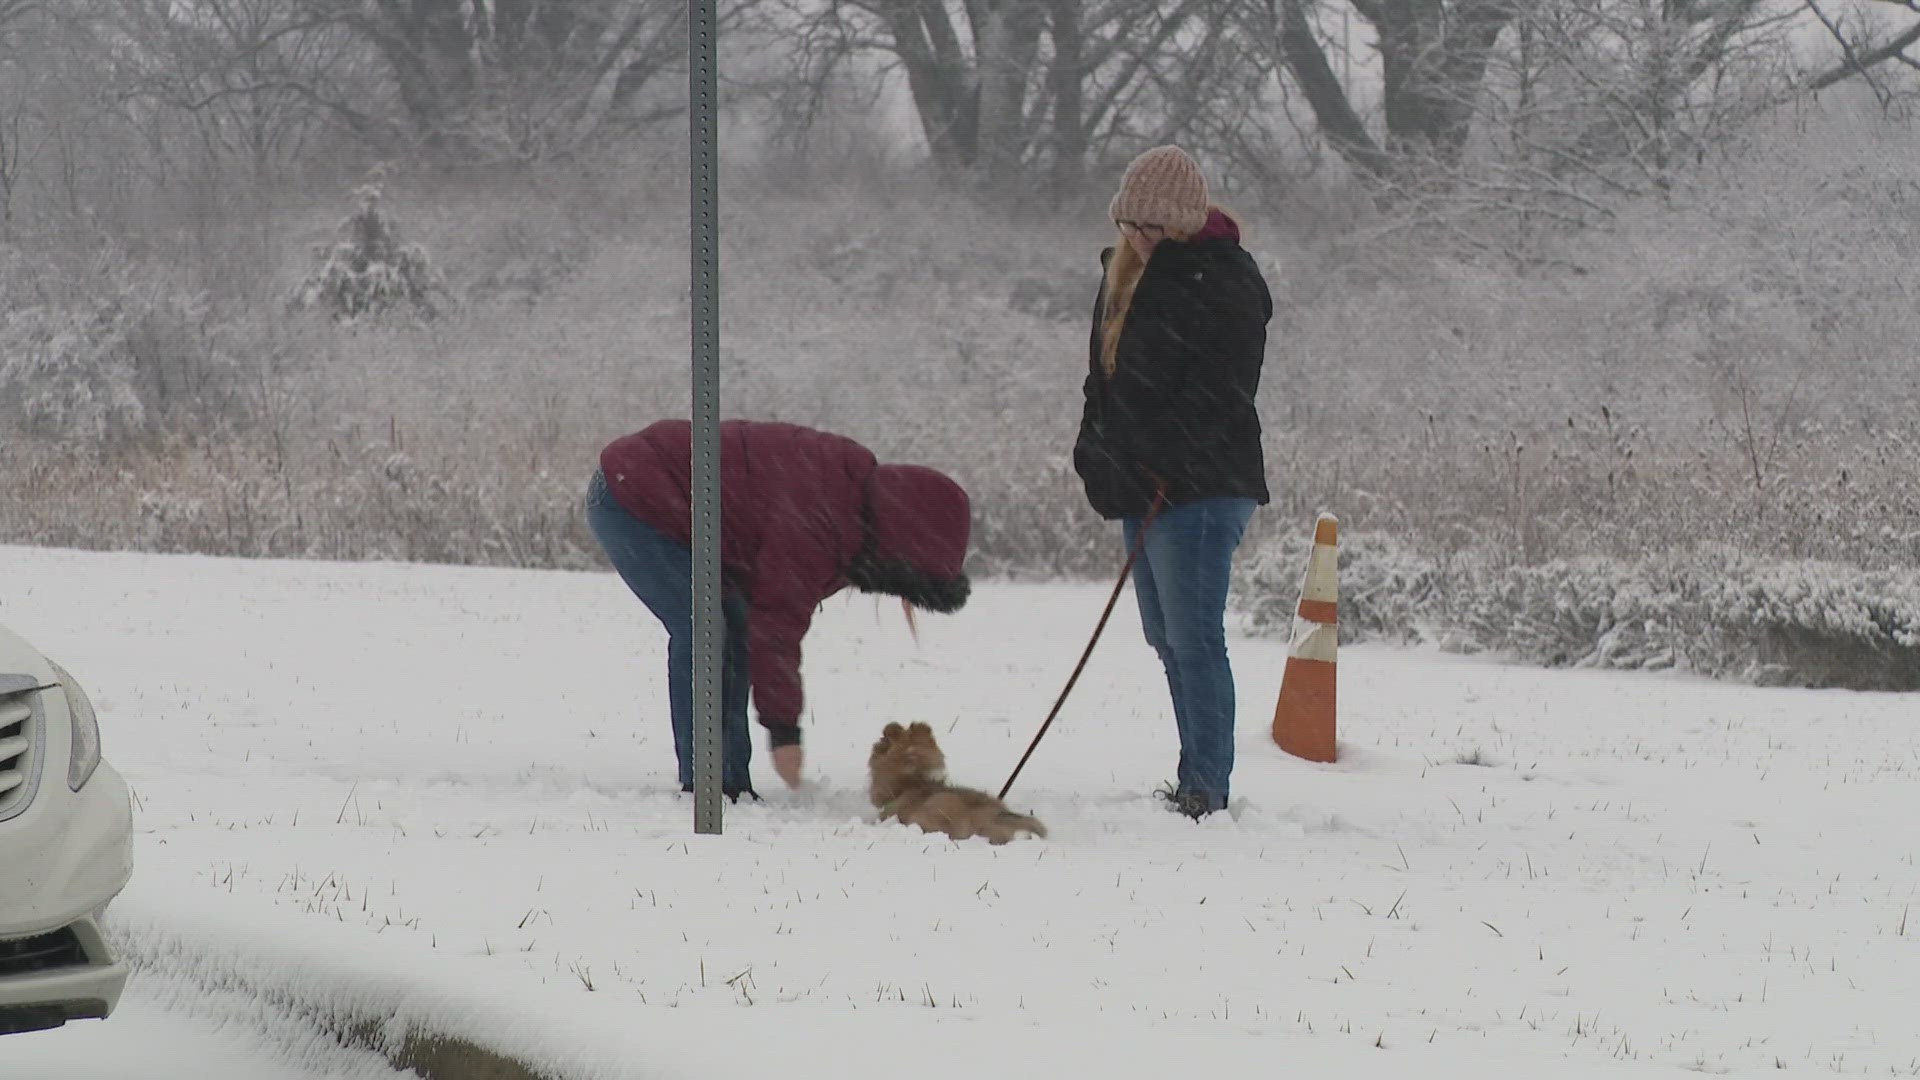 13News reporter Anna Chalker talks with experts on how they can keep their pets safe in the winter.